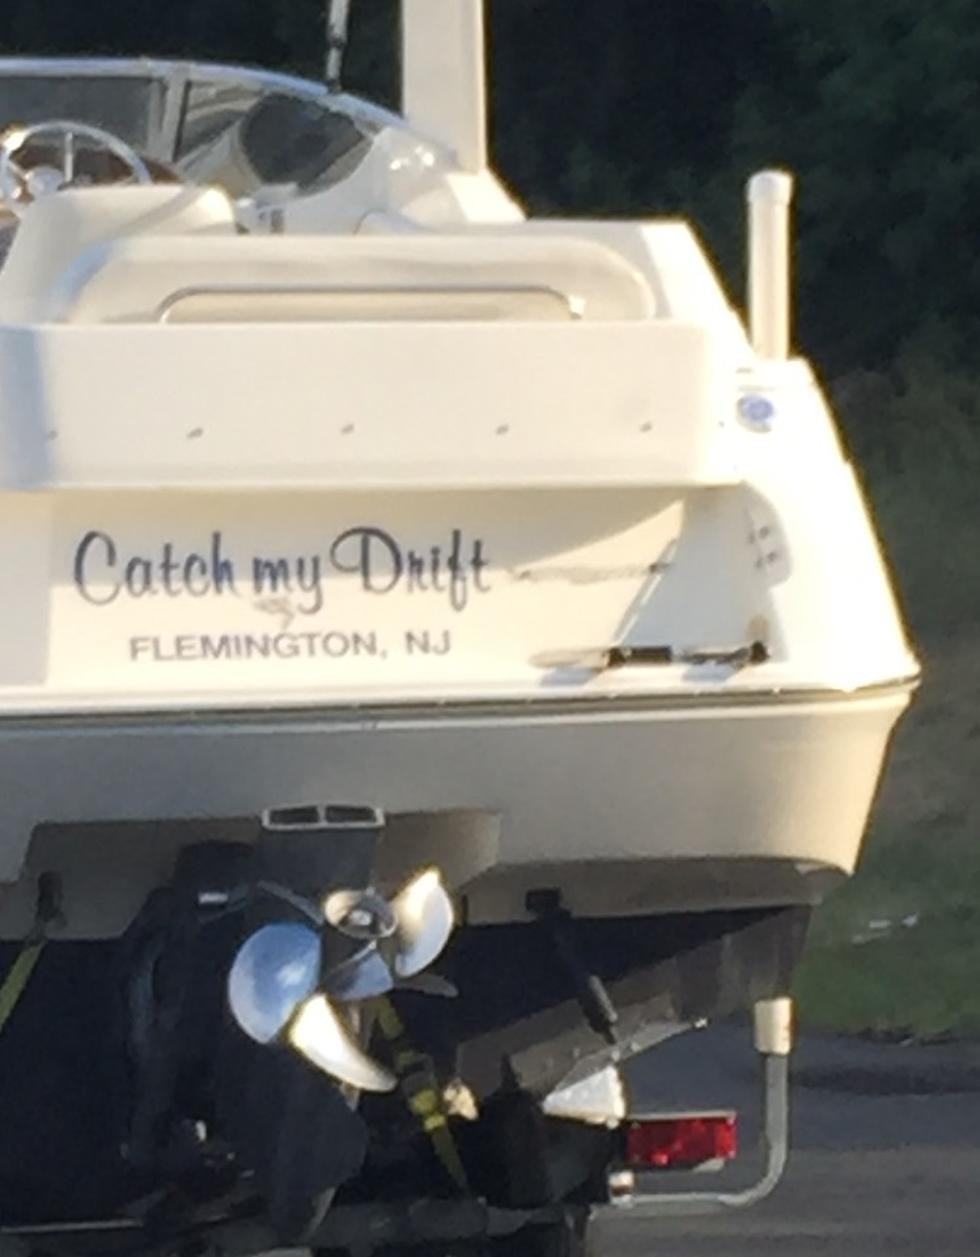 Let us know your best boat name ideas